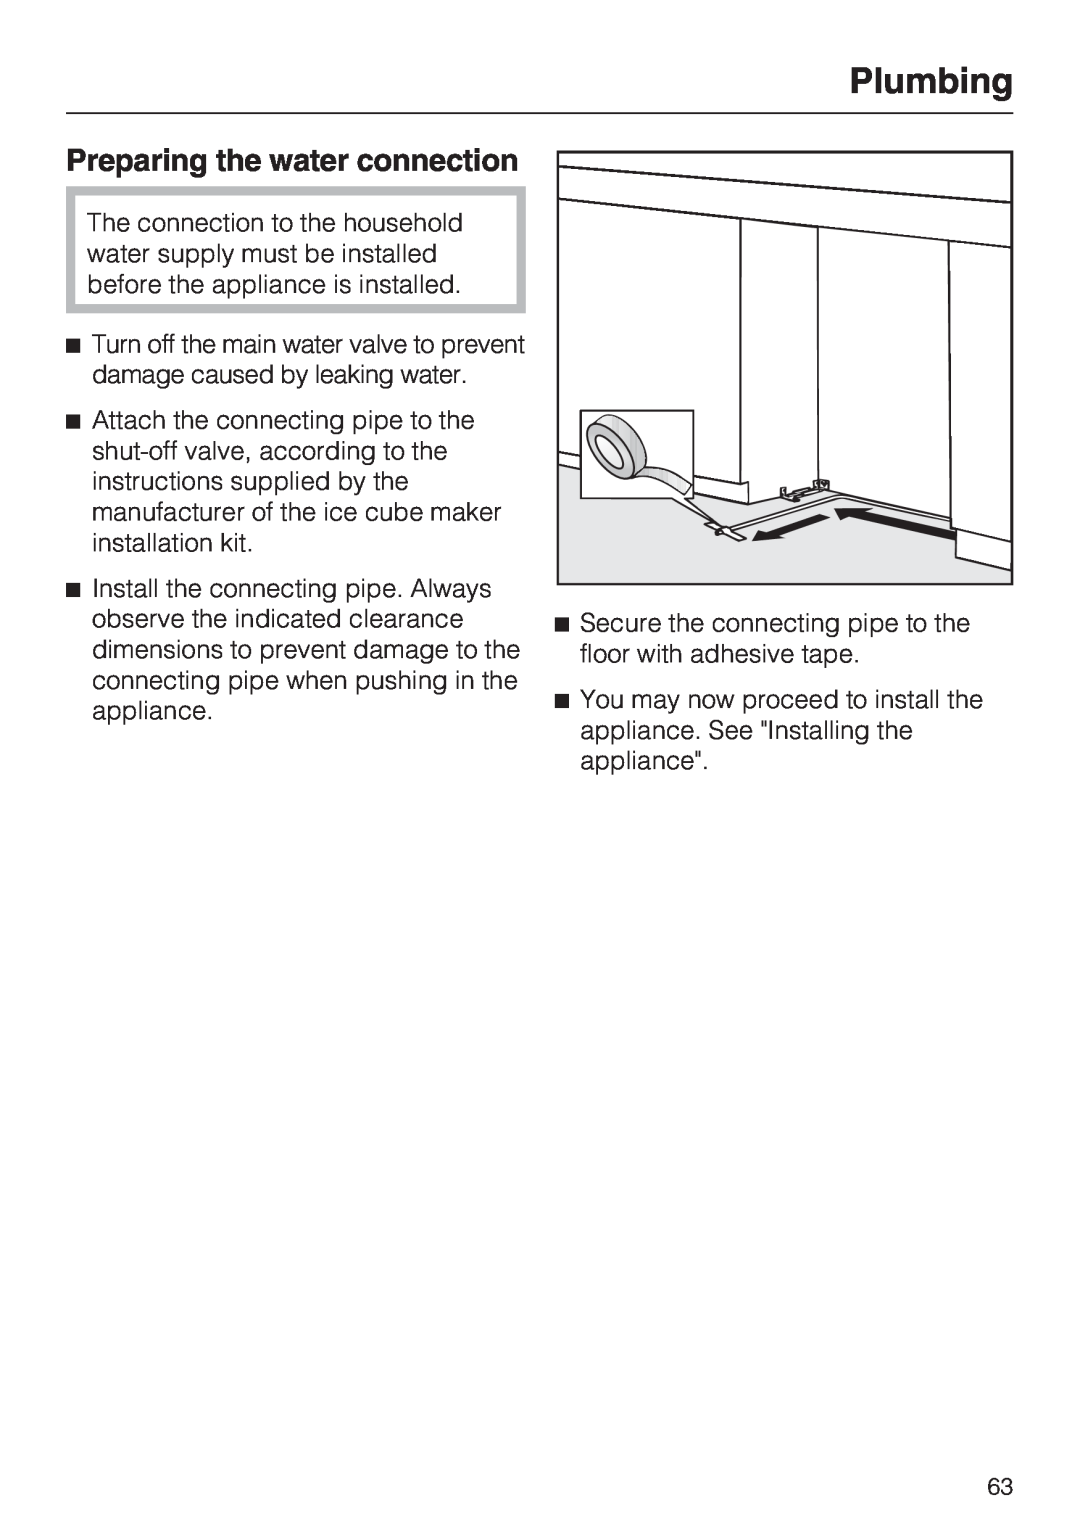 Miele F1411SF installation instructions Plumbing, Preparing the water connection 